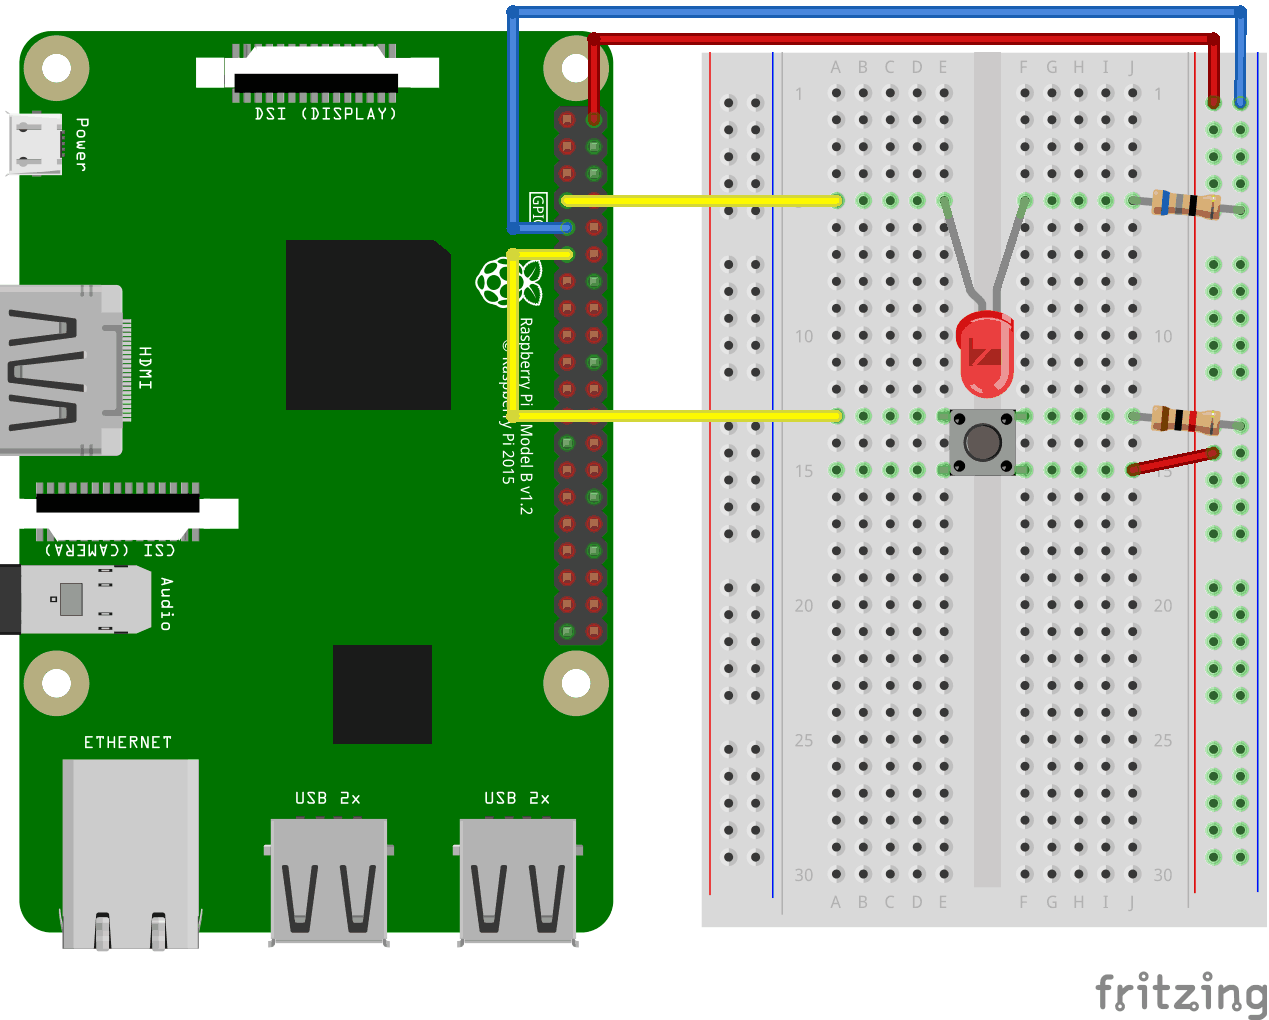 Raspberry Pi 3 with Breadboard. LED and Button circuit